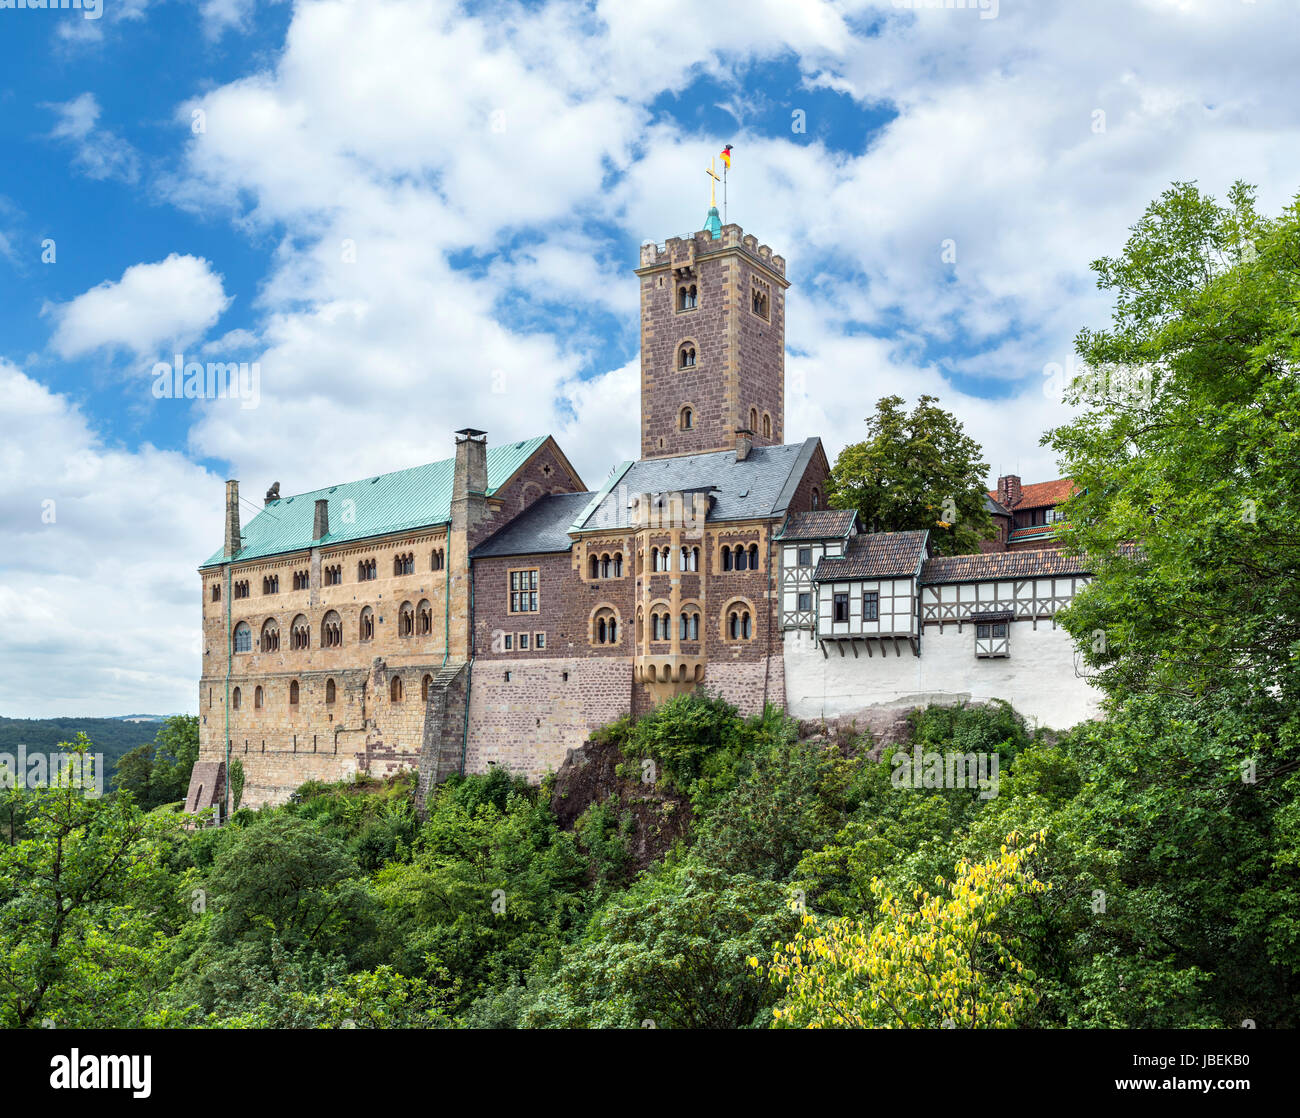 The Wartburg castle, where Martin Luther translated the New Testament of the Bible into German, Eisenach, Thuringia, Germany Stock Photo